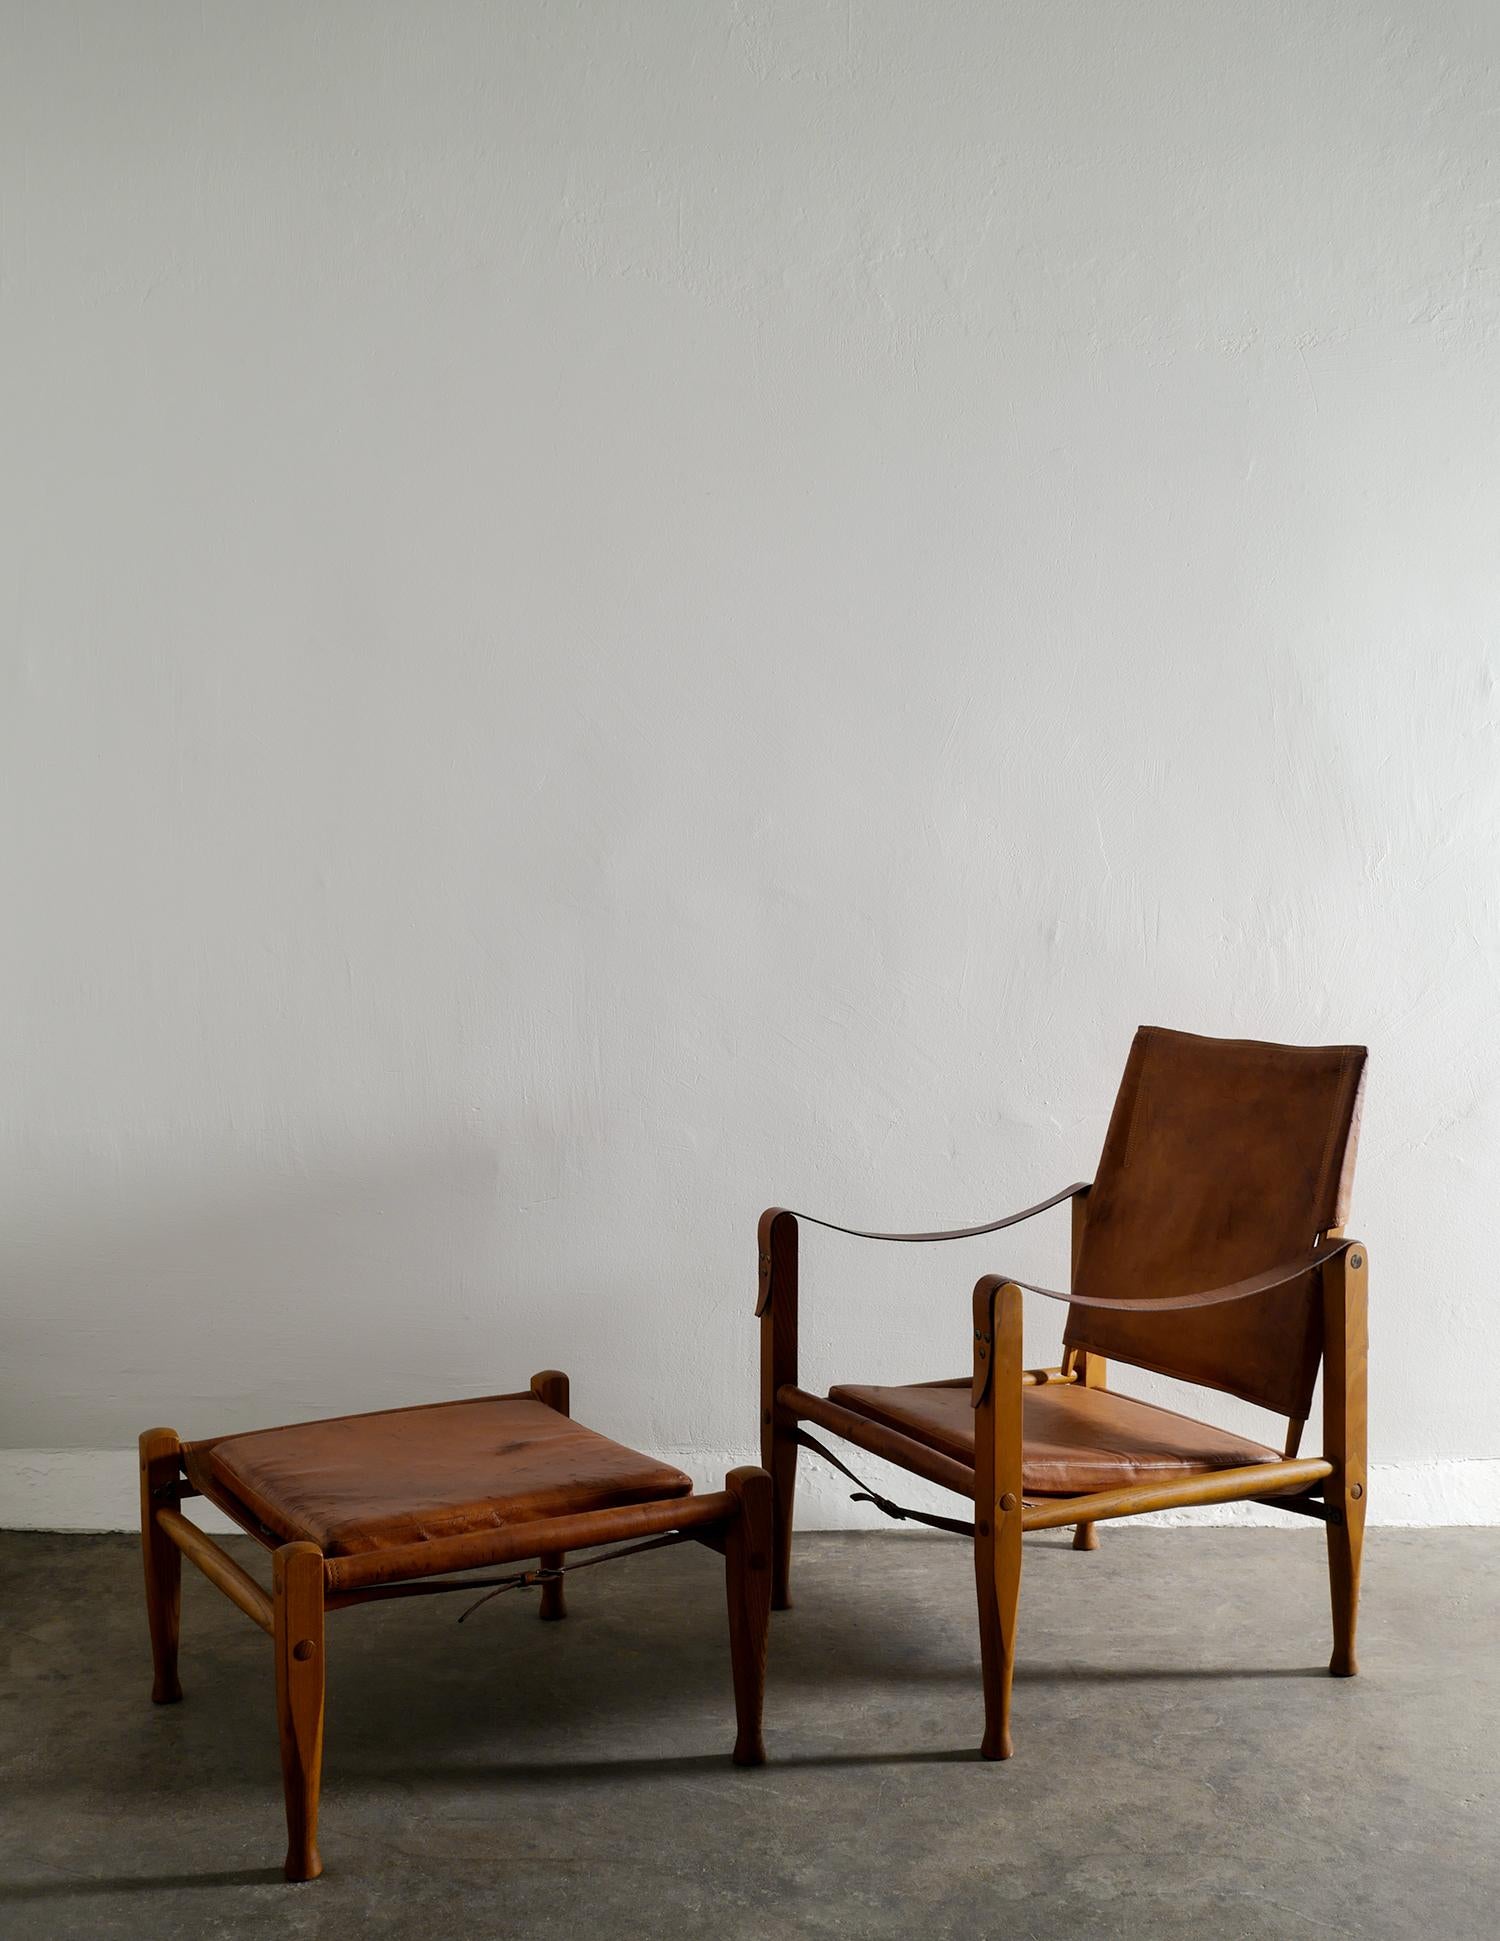 Rare mid-century safari lounge chair and ottoman designed by Kaare Klint and produced by 